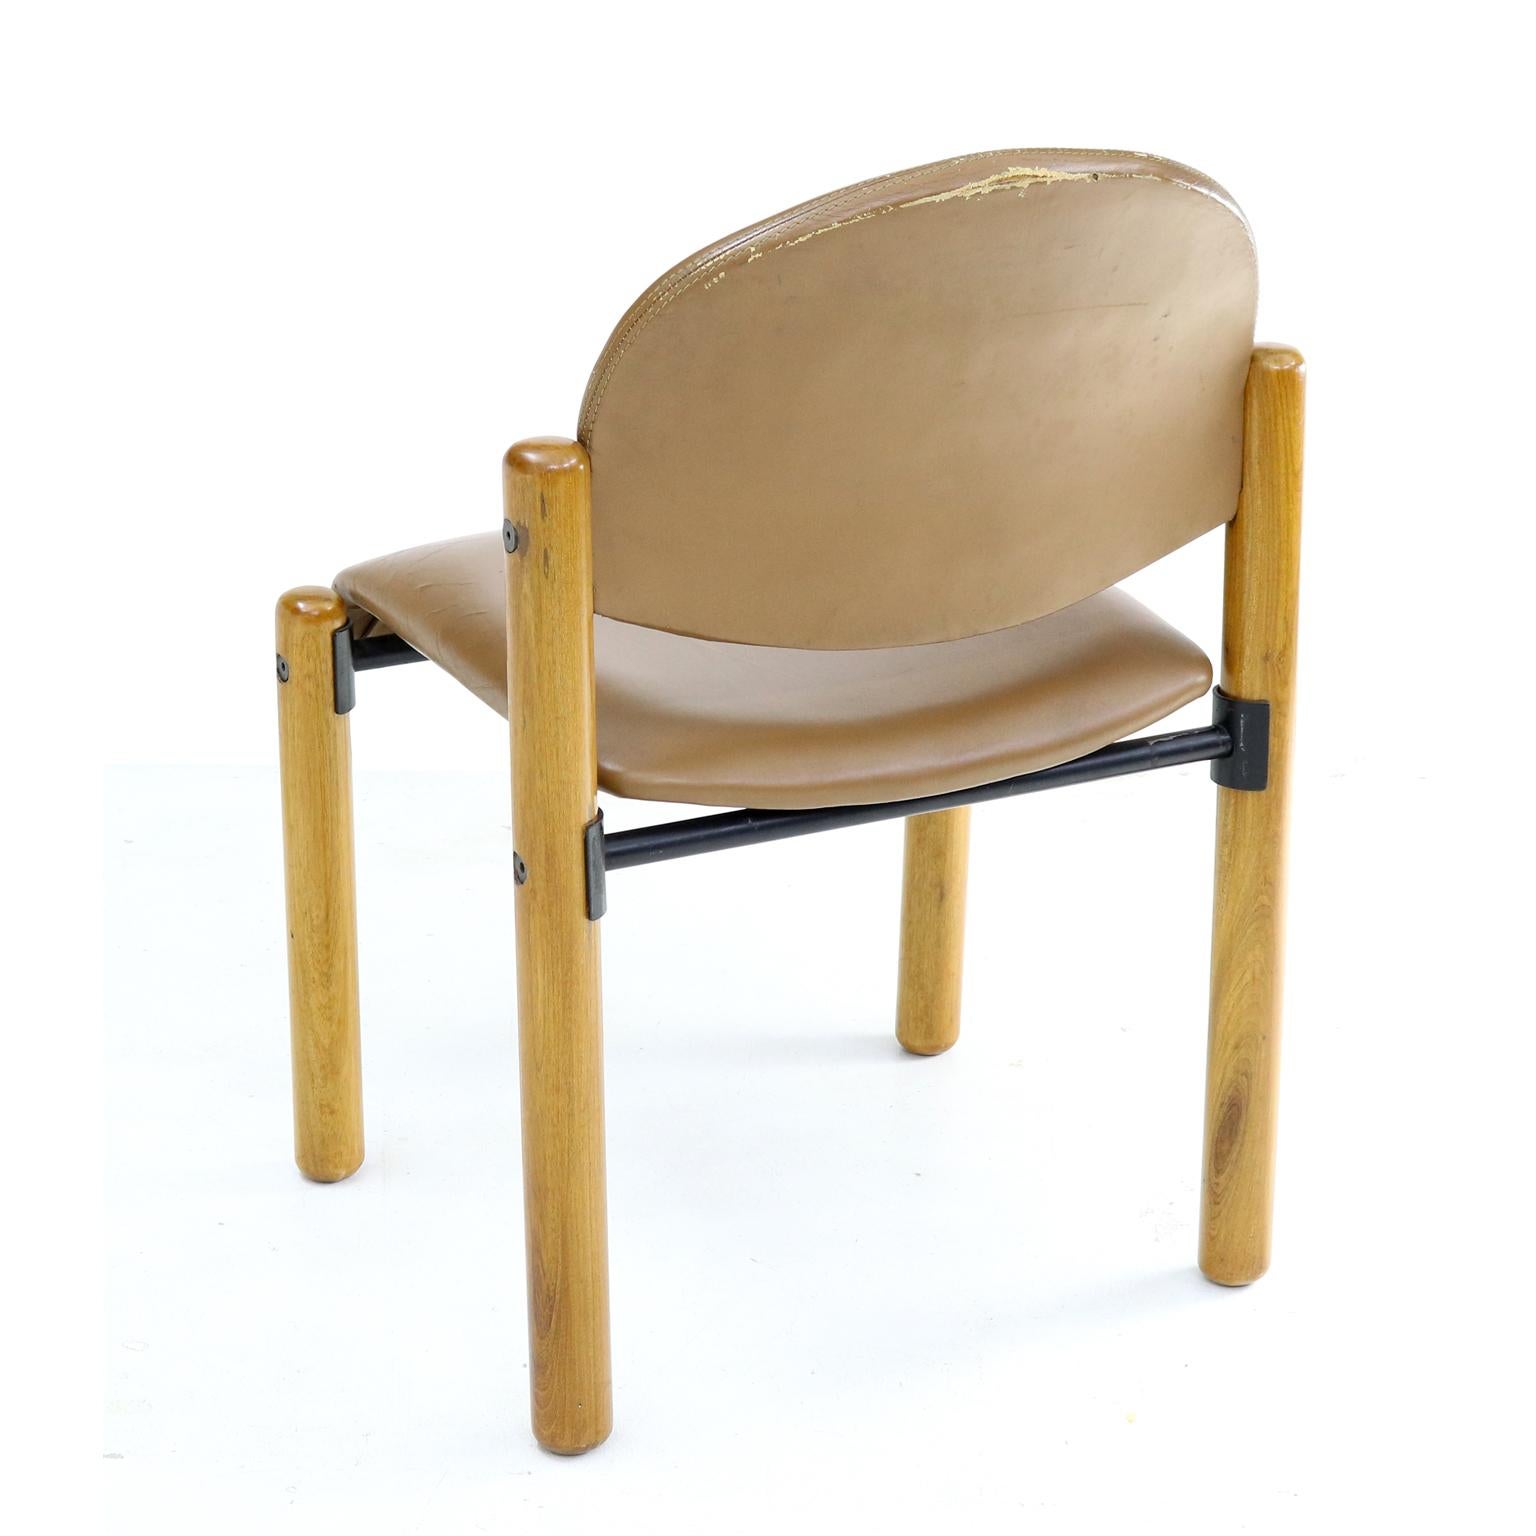 Post-Modern Brazilian Midcentury Chair Designed by Sergio Rodrigues